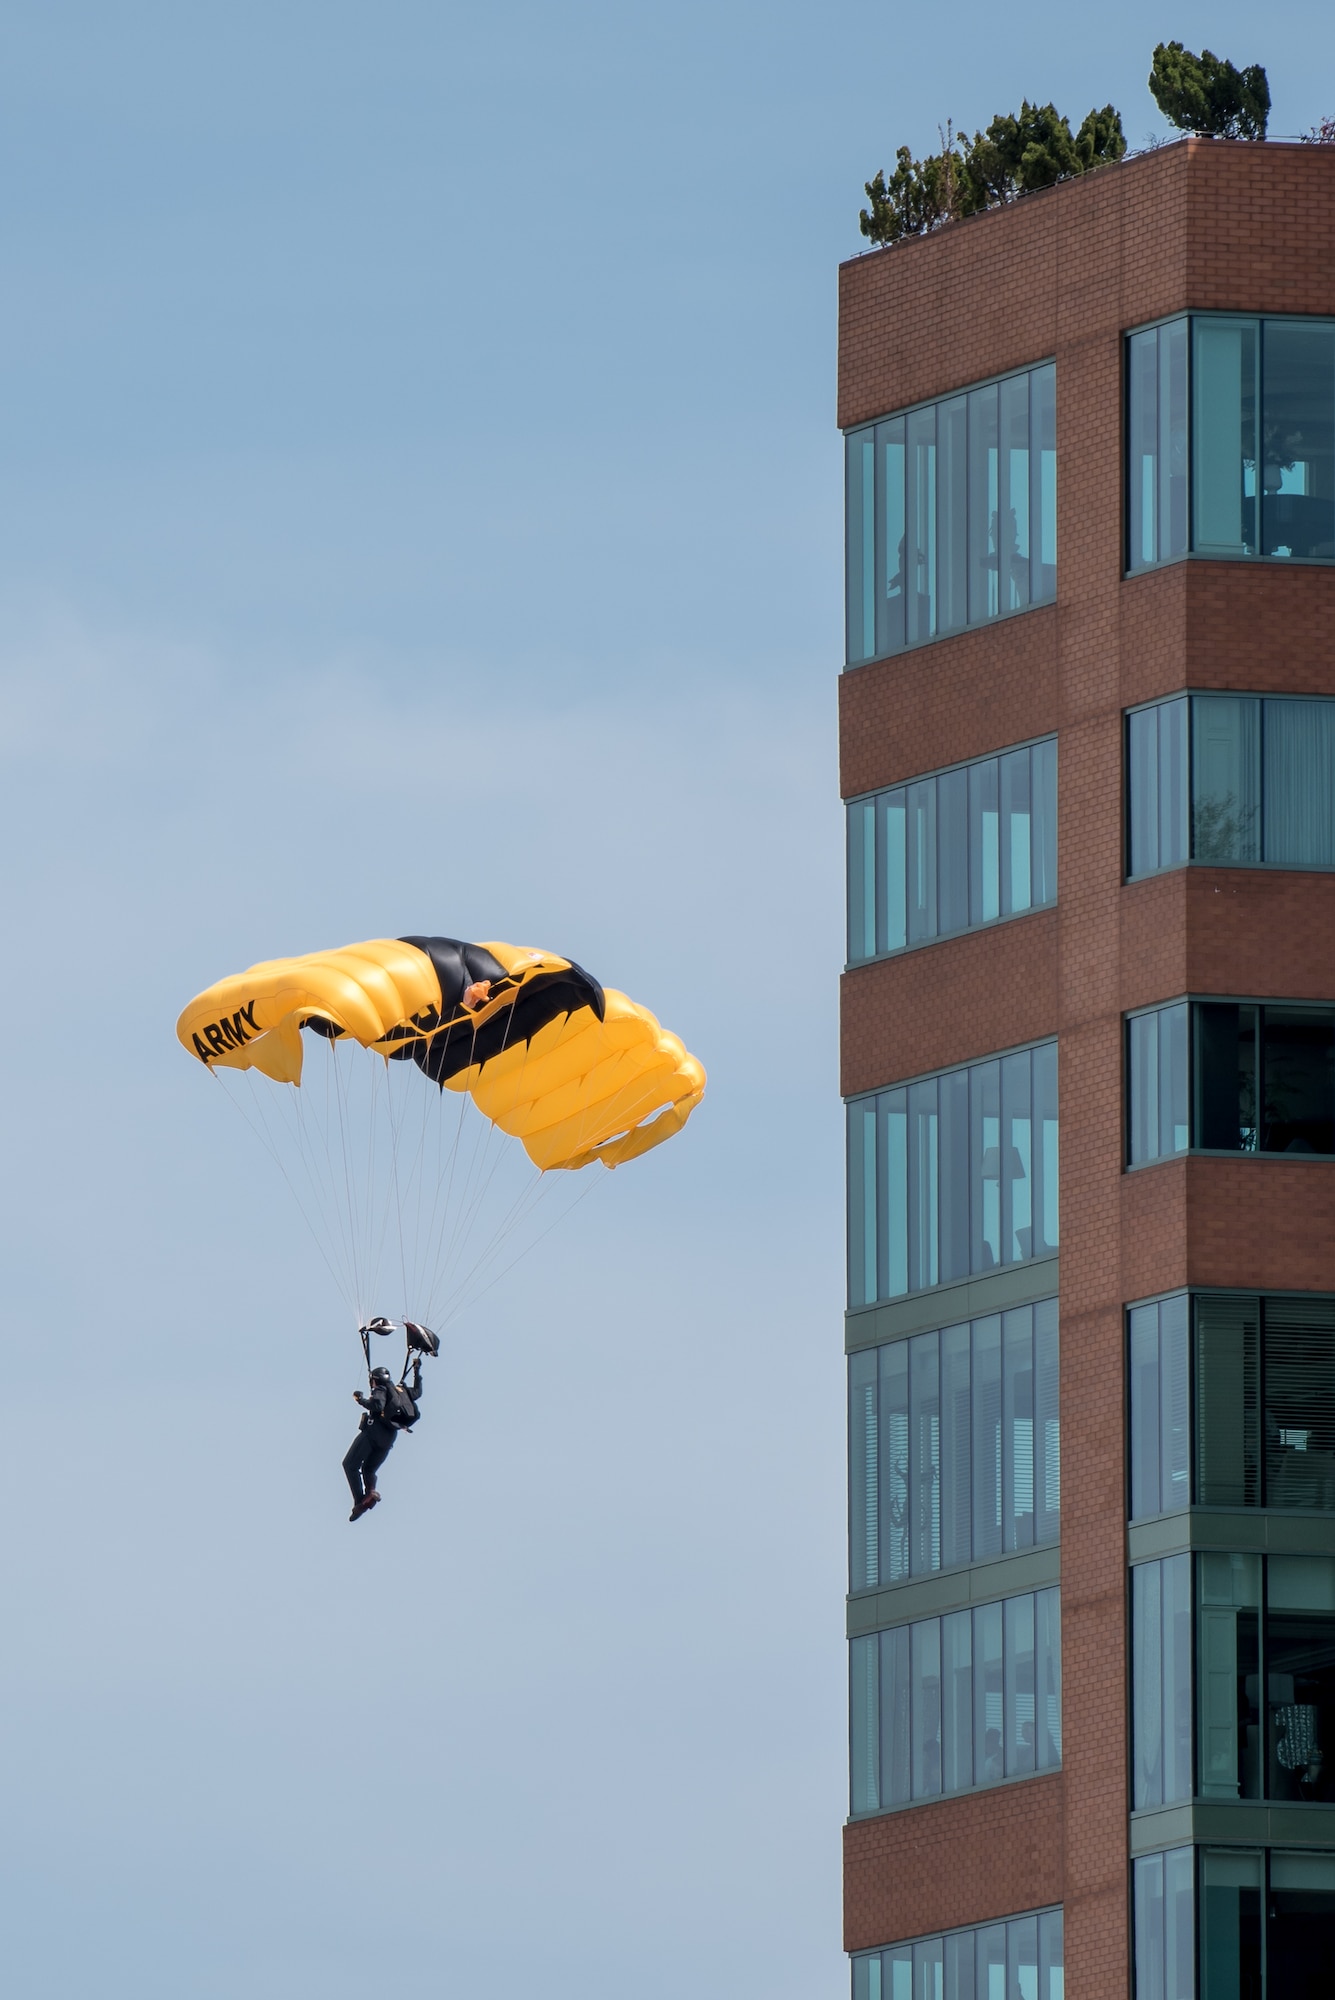 A Soldier from the U.S. Army's Golden Knights parachute demonstration team floats toward Waterfront Park in downtown Louisville, Ky., April 21, 2018, to kick off the Thunder Over Louisville air show. This year’s show drew a crowd of more than 500,000 to the banks of the Ohio River. (U.S. Air National Guard photo by Lt. Col. Dale Greer)